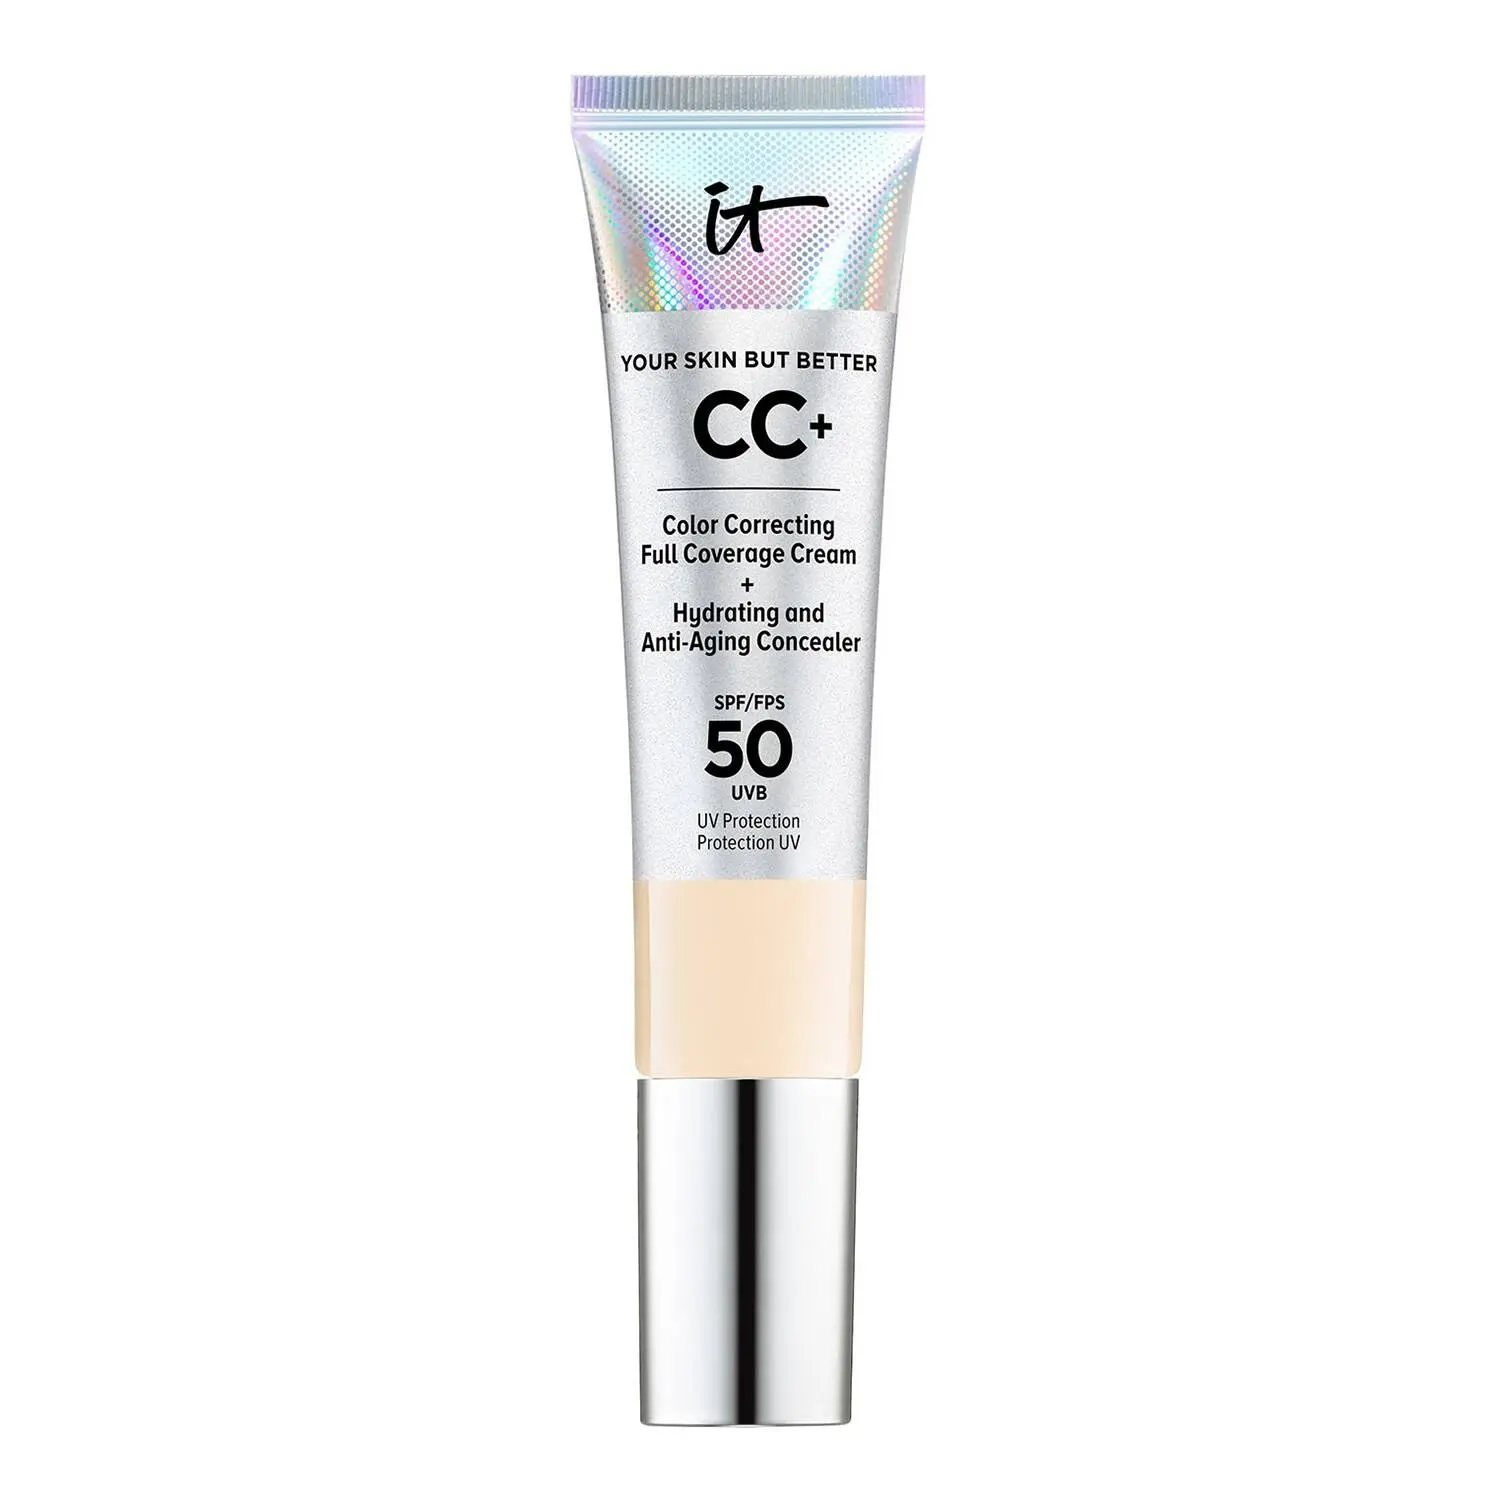 IT Cosmetics Your Skin But Better CC+ Cream with SPF50 32ml Discounts and Cashback